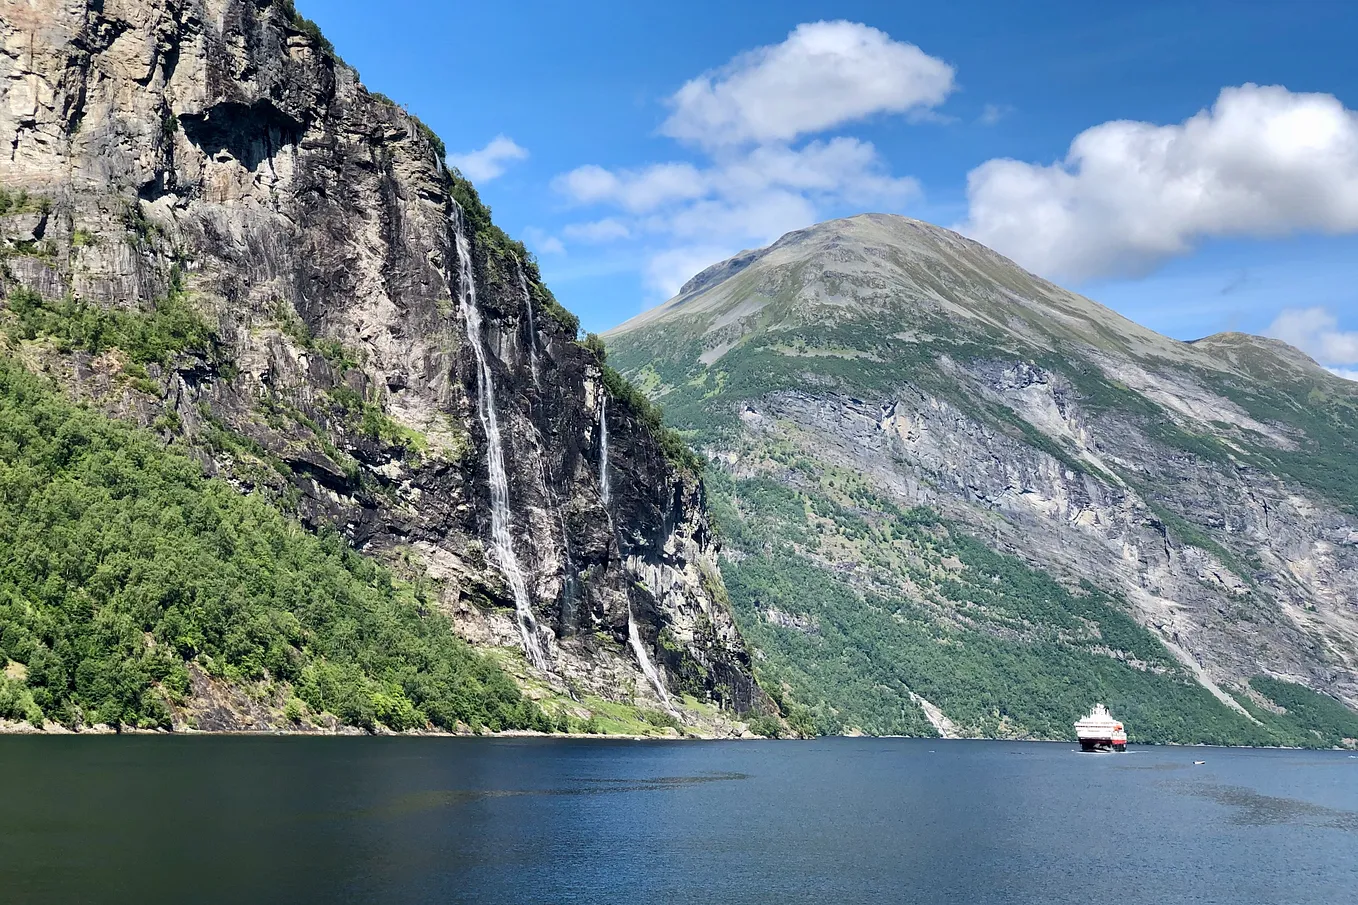 Exploring the fjords in west Norway: 6 days from Ålesund to Bergen